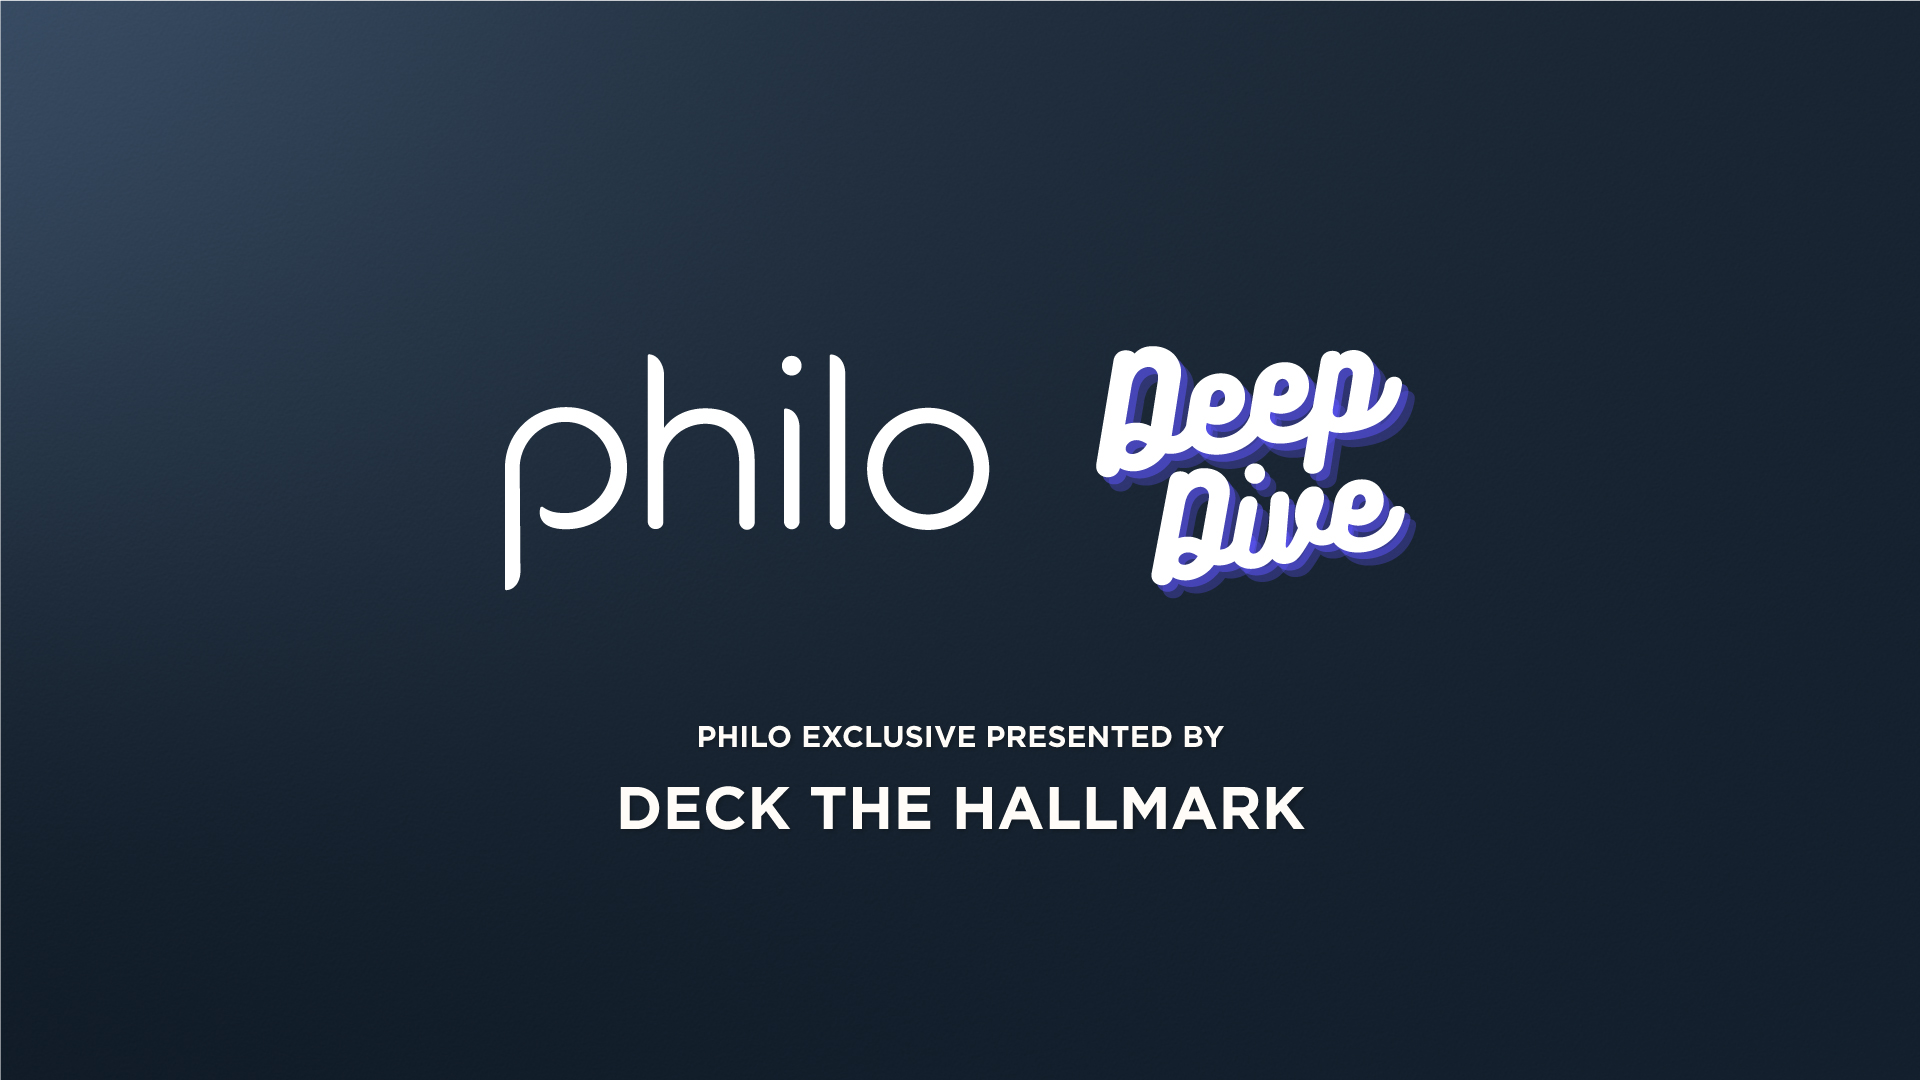 Discover Uncharted Territories of Entertainment with The Philo Deep Dive